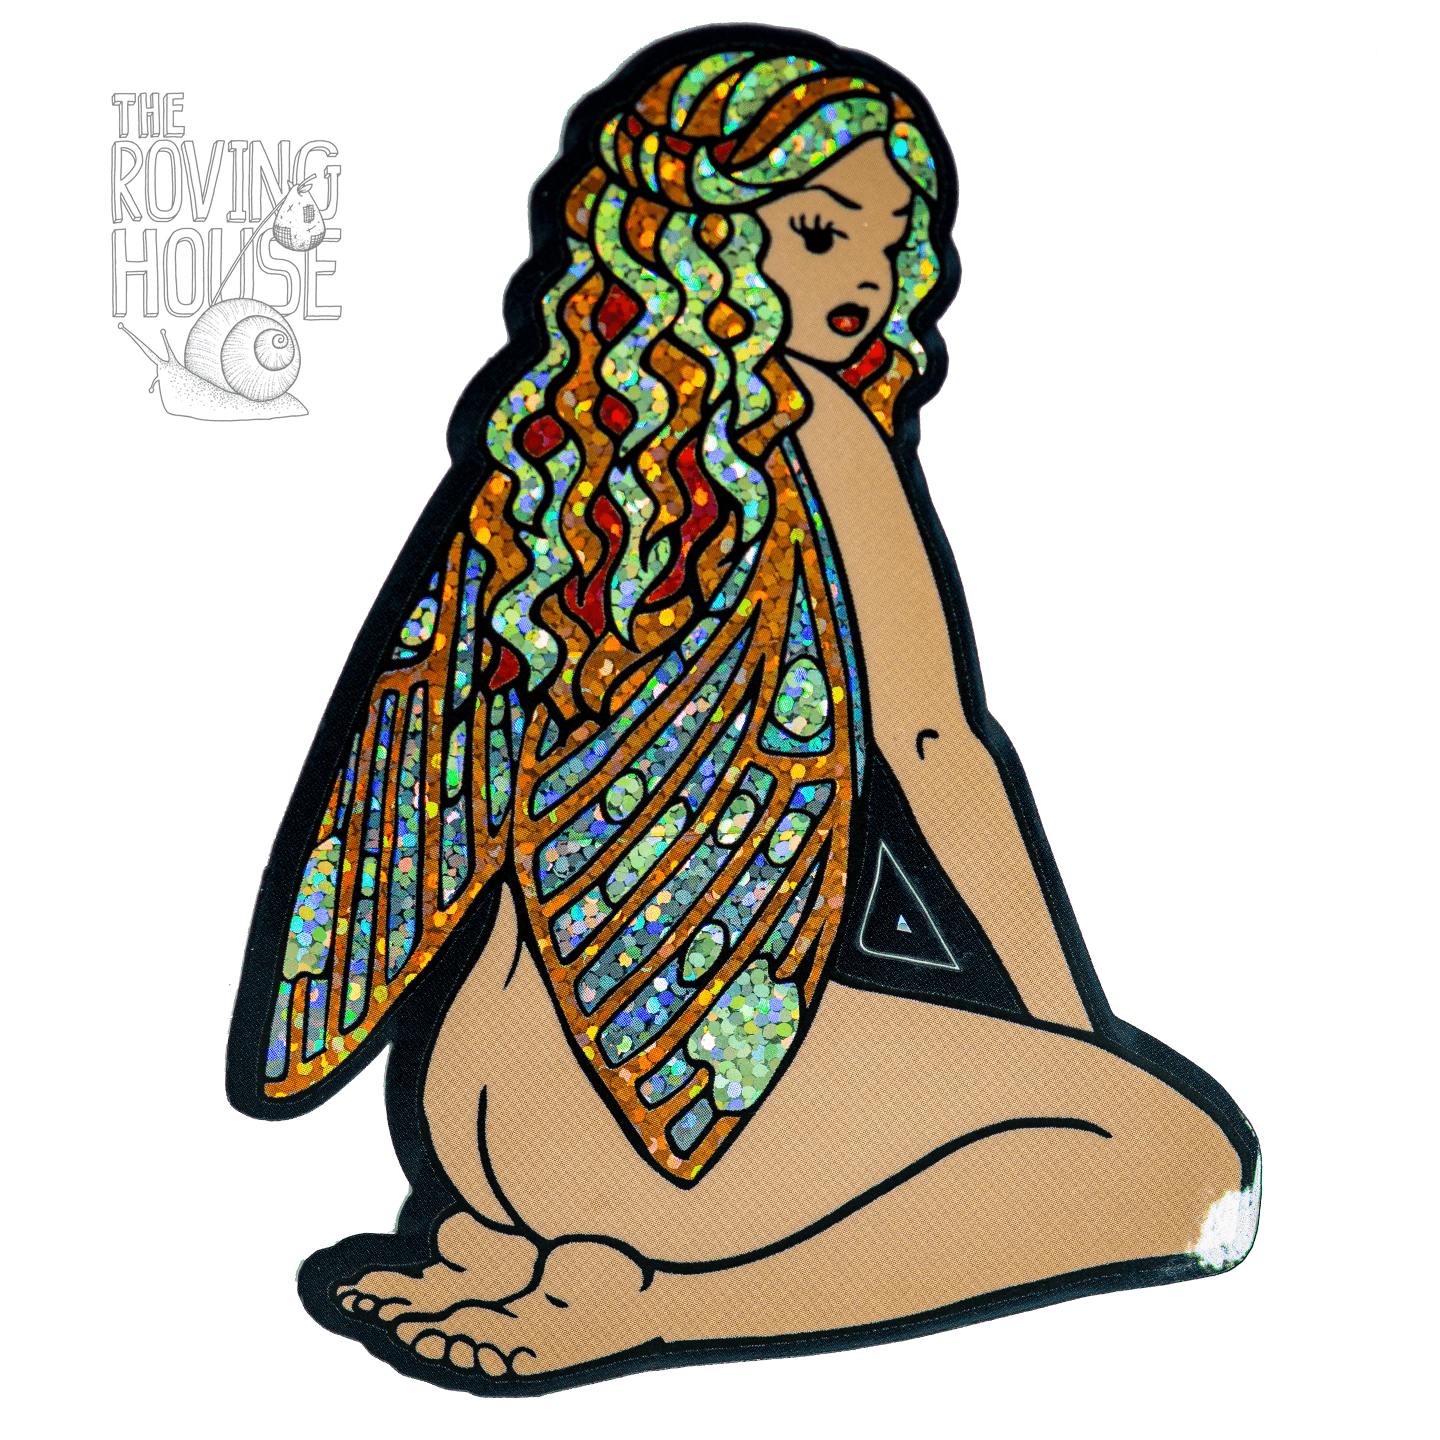 A sticker of a nude fairy with light brown skin and a slightly haughty expression, sitting down and looking back over her shoulder. She has red lips, red, yellow, and orange hair, and the yellow, orange, and grey wings of a Citheronia regalis moth. Her wings, hair, and lips glitter.